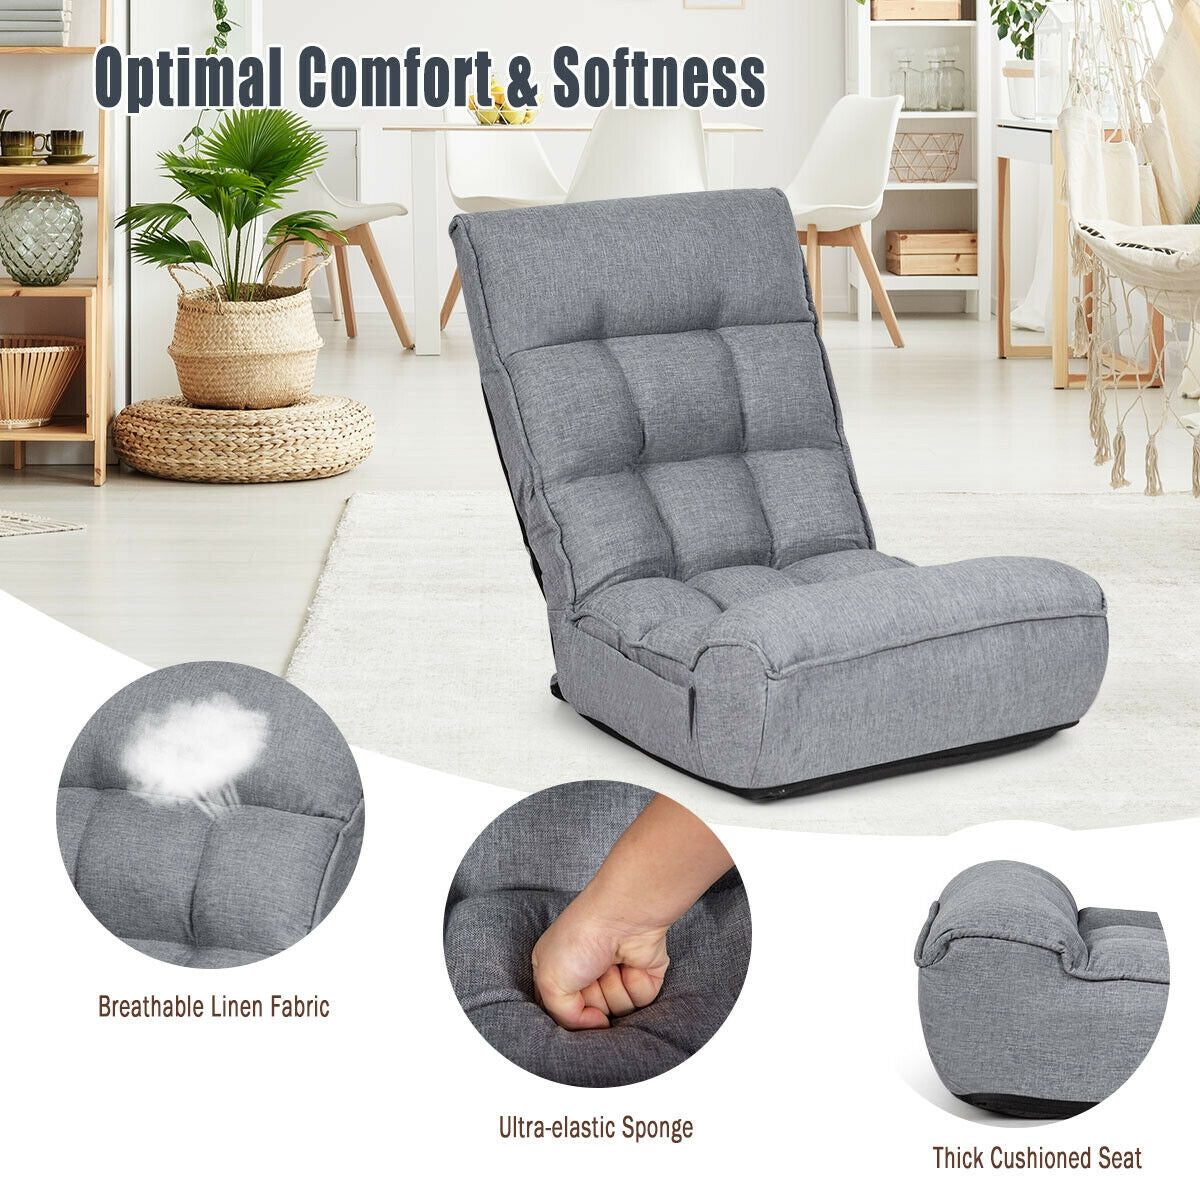 Comfortable and Breathable: Sink into relaxation with a high-elastic sponge-filled seat and back, covered in a breathable linen fabric for a soft touch and comfortable experience.